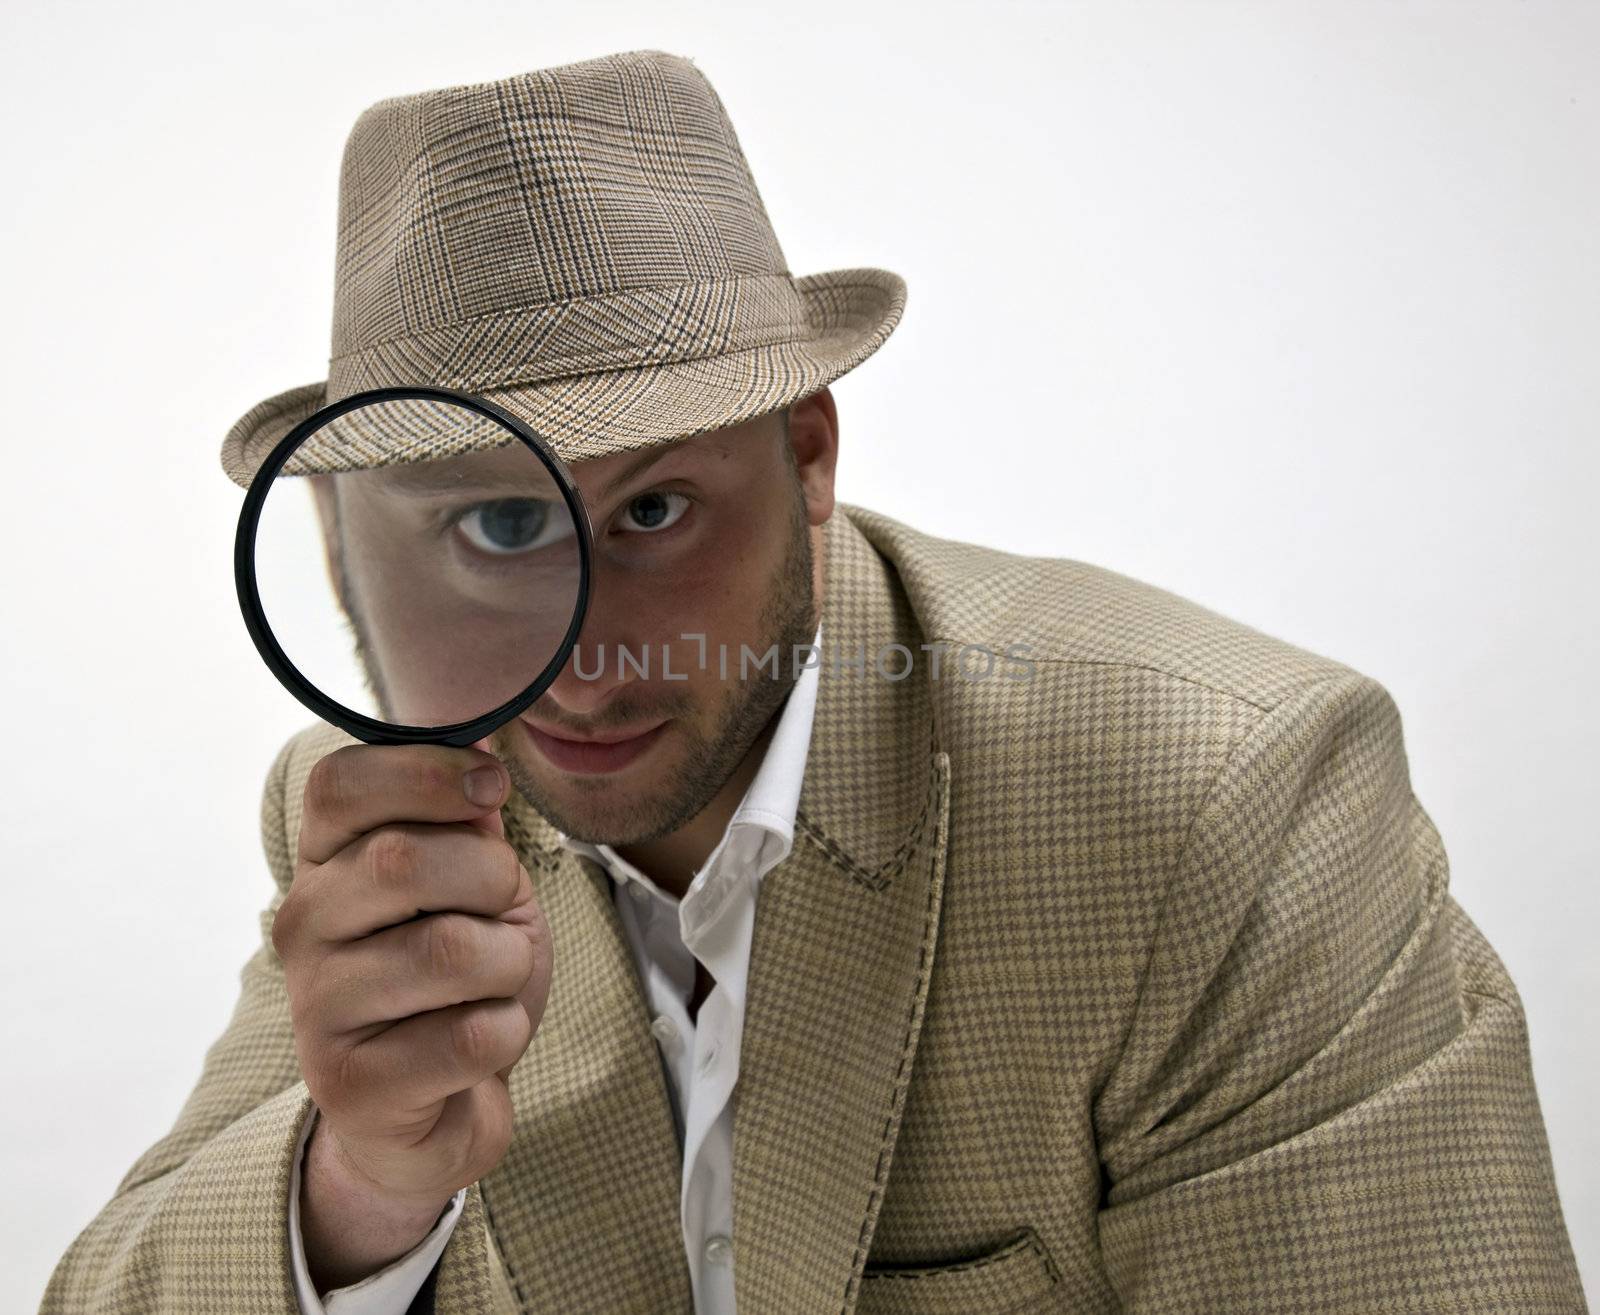 spying man with magnifying glass on isolated background
